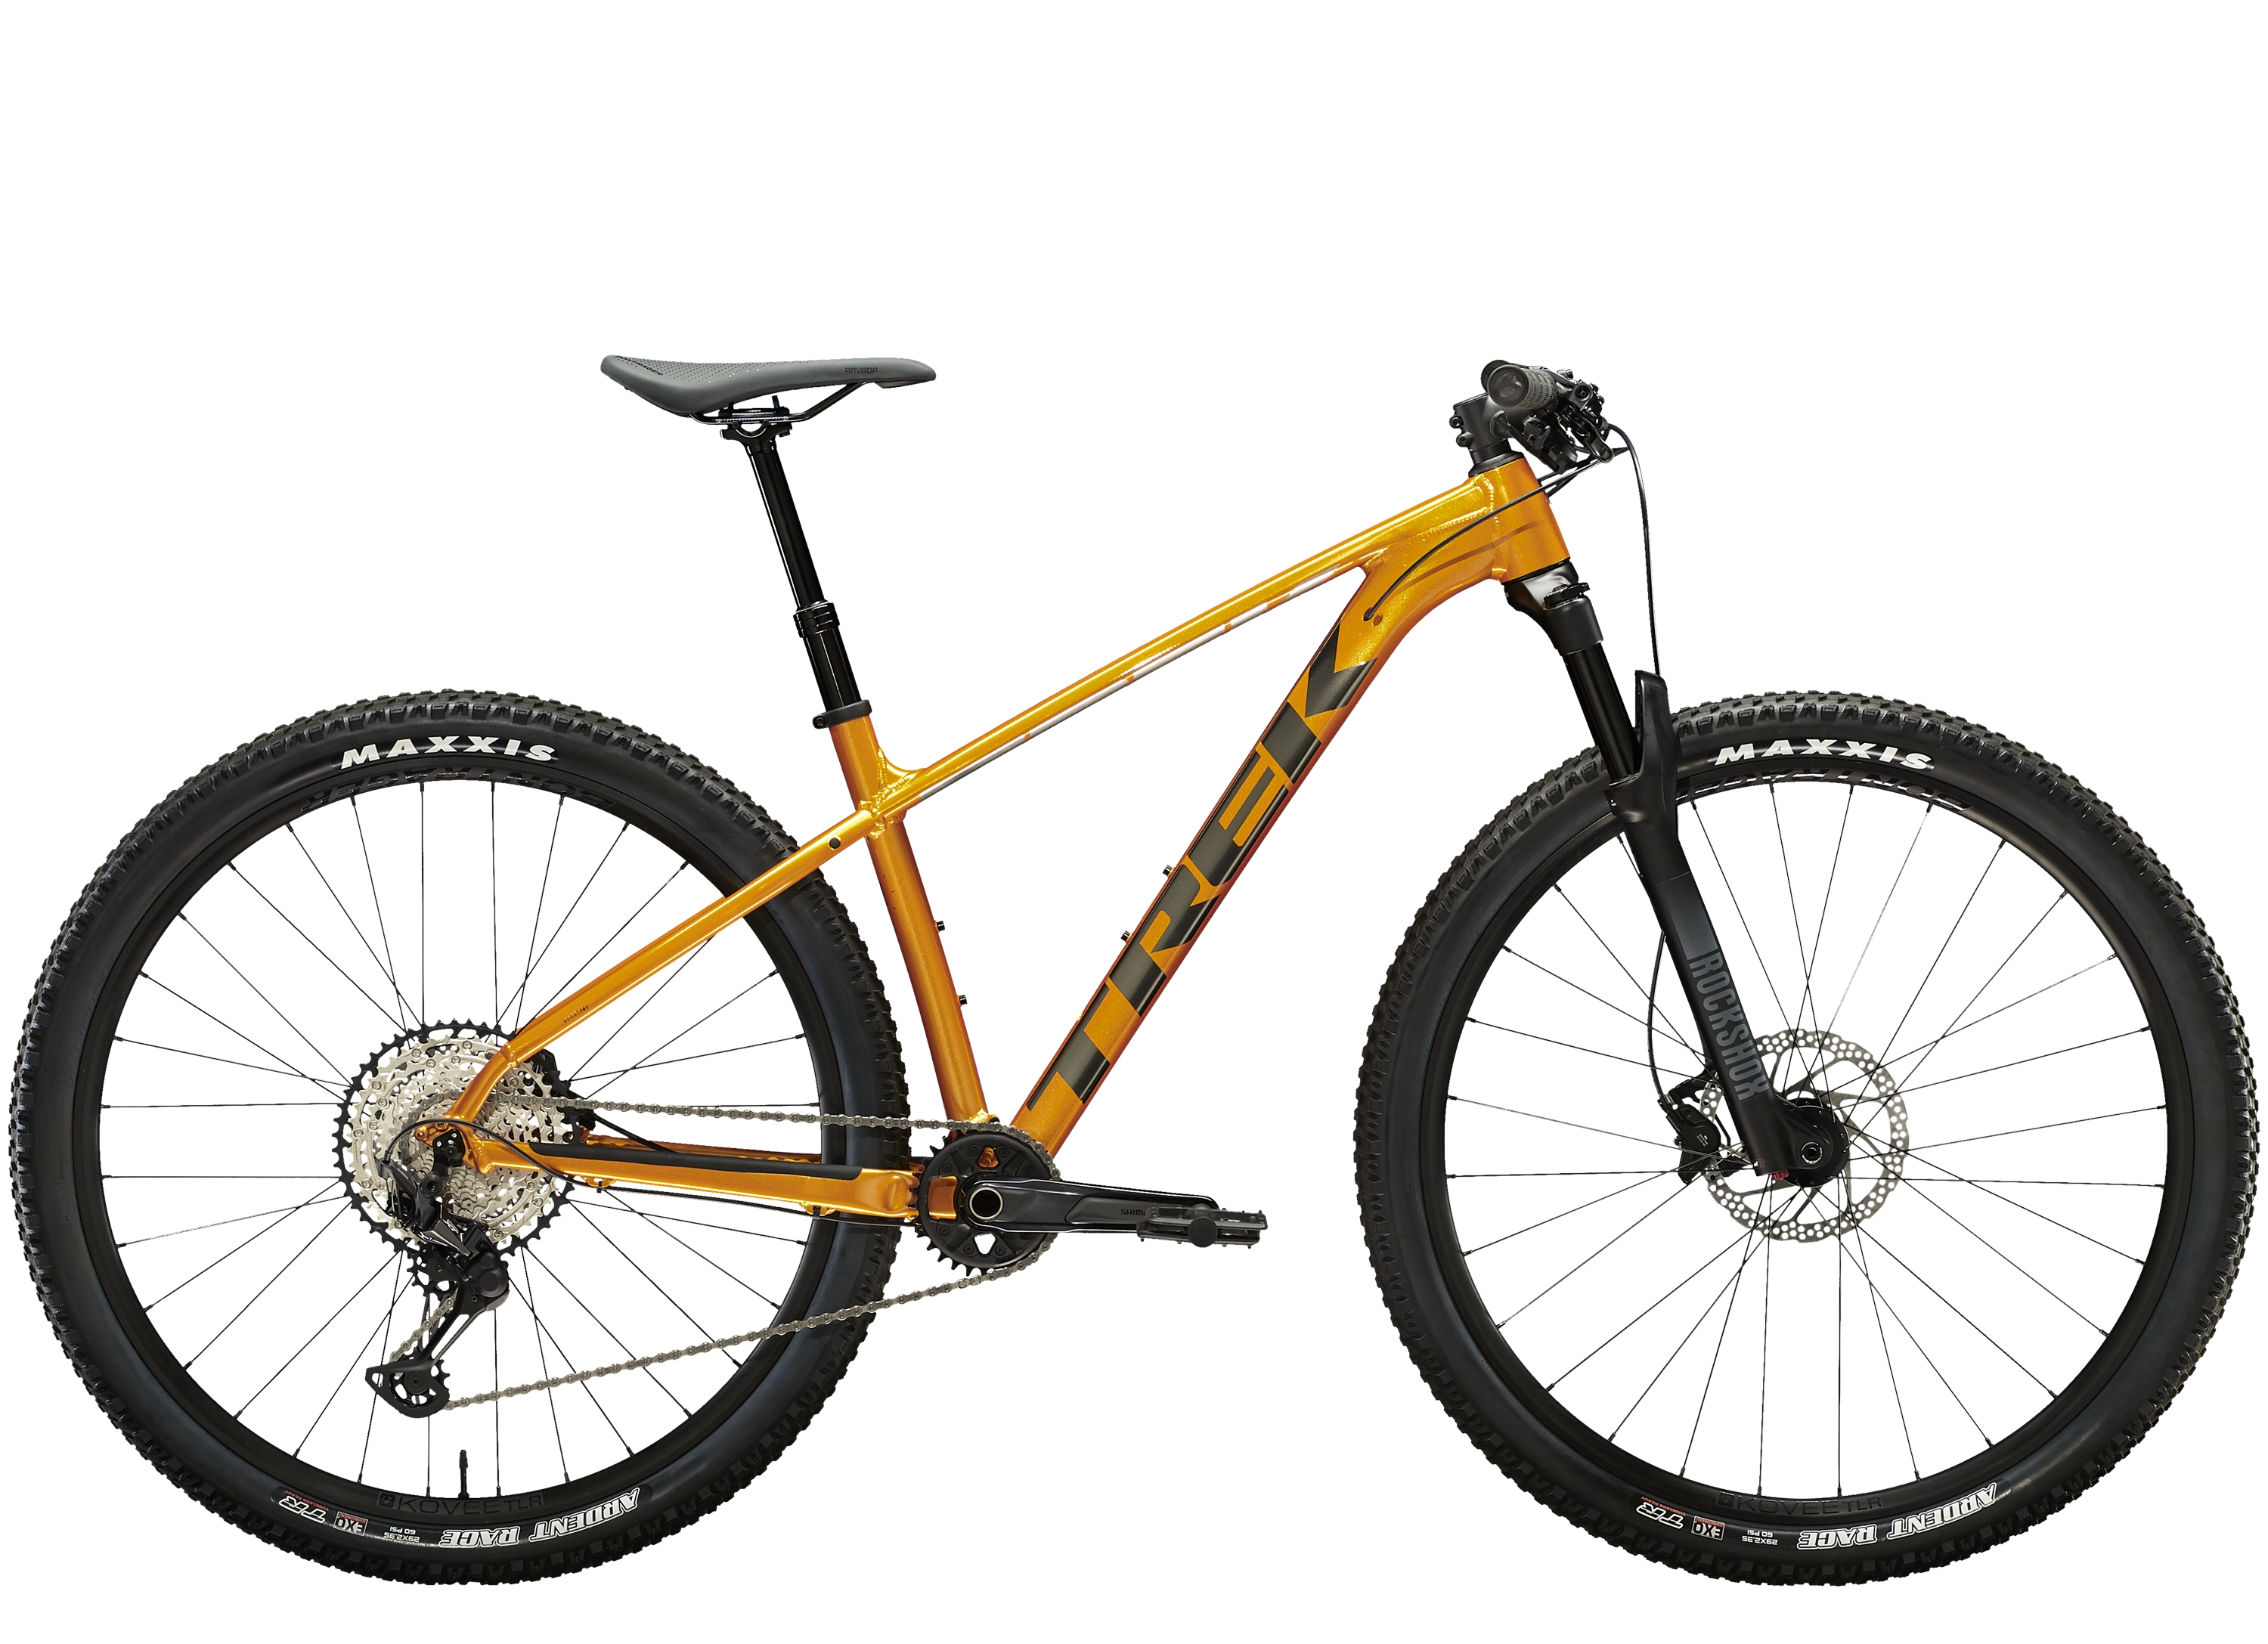 <a href="https://cycles-clement.be/product/x-caliber-9-xl-29-factory-orange/">X-CALIBER 9 XL 29 FACTORY ORANGE</a>